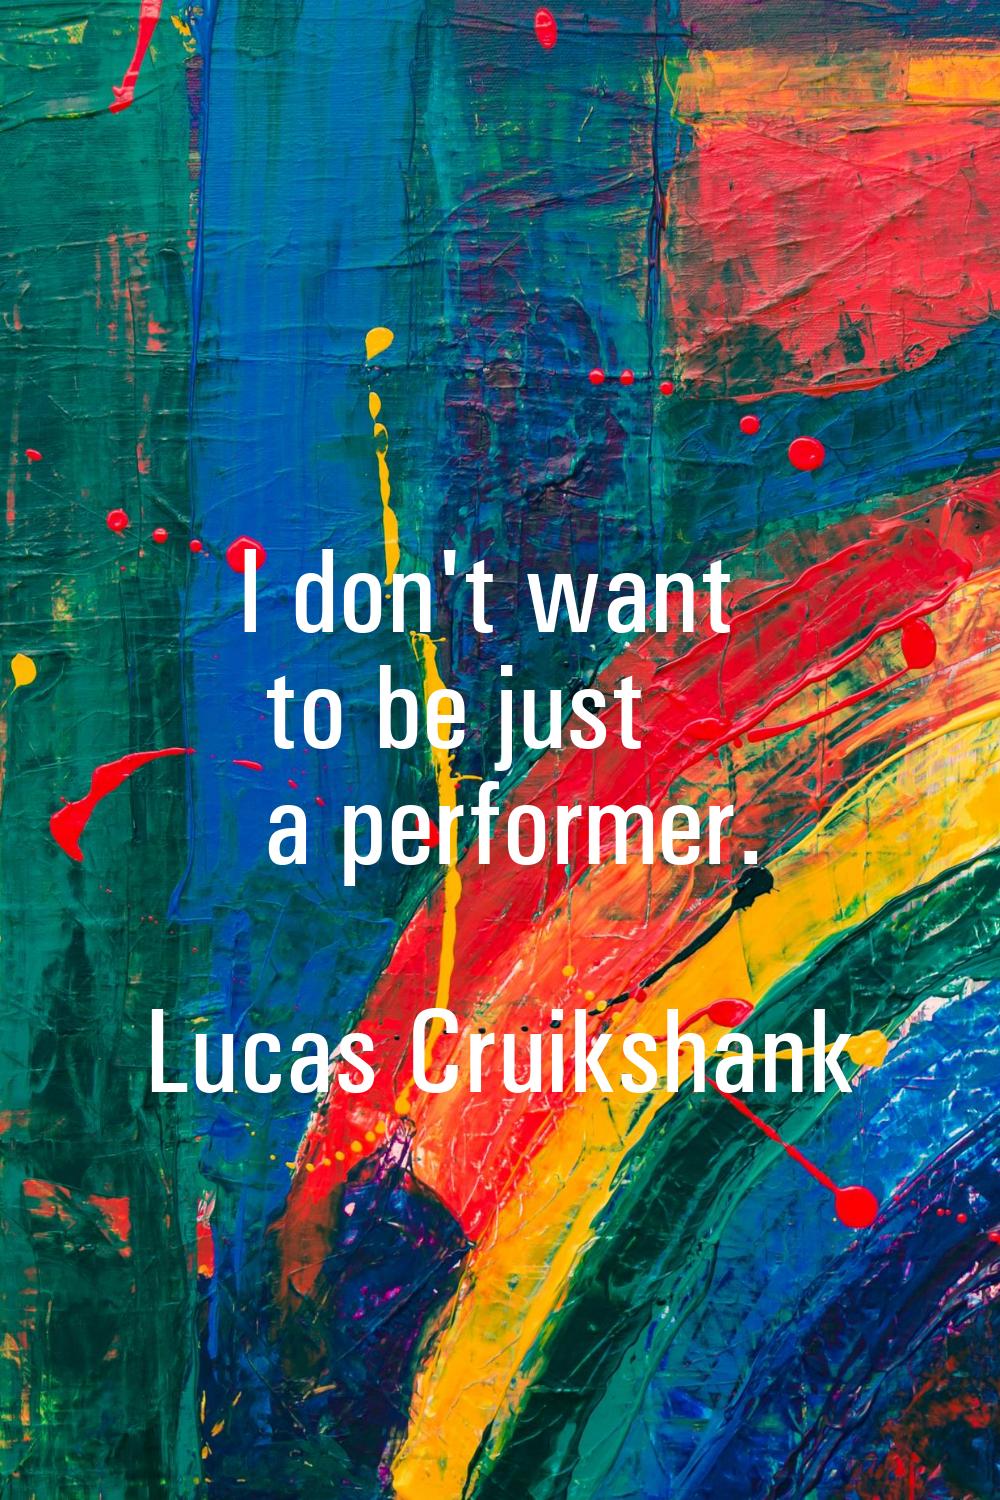 I don't want to be just a performer.